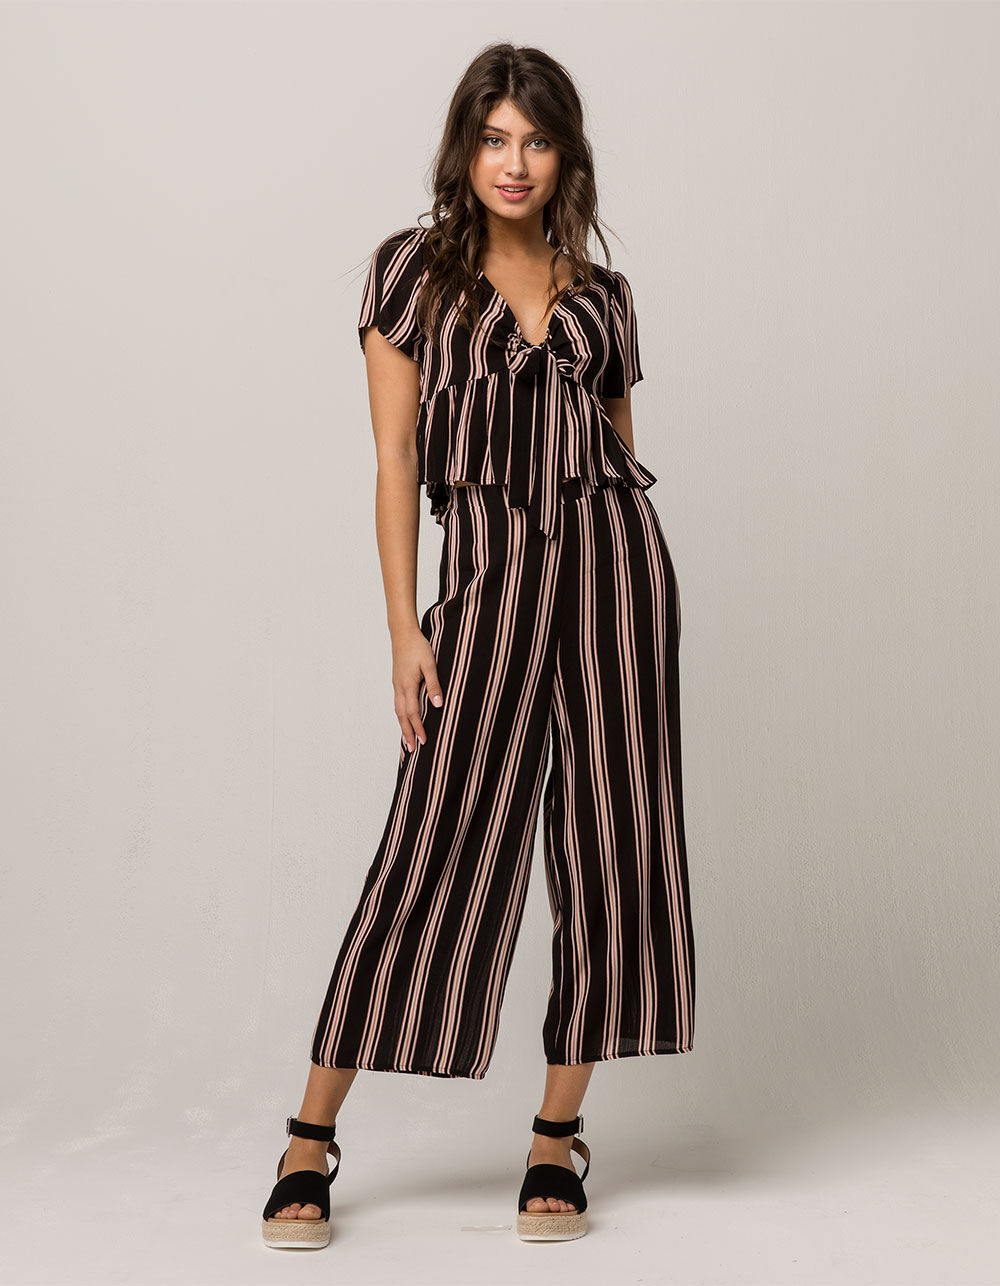 SKY AND SPARROW Stripe Tie Front Womens Top And Pants Set - BLACK COMBO ...